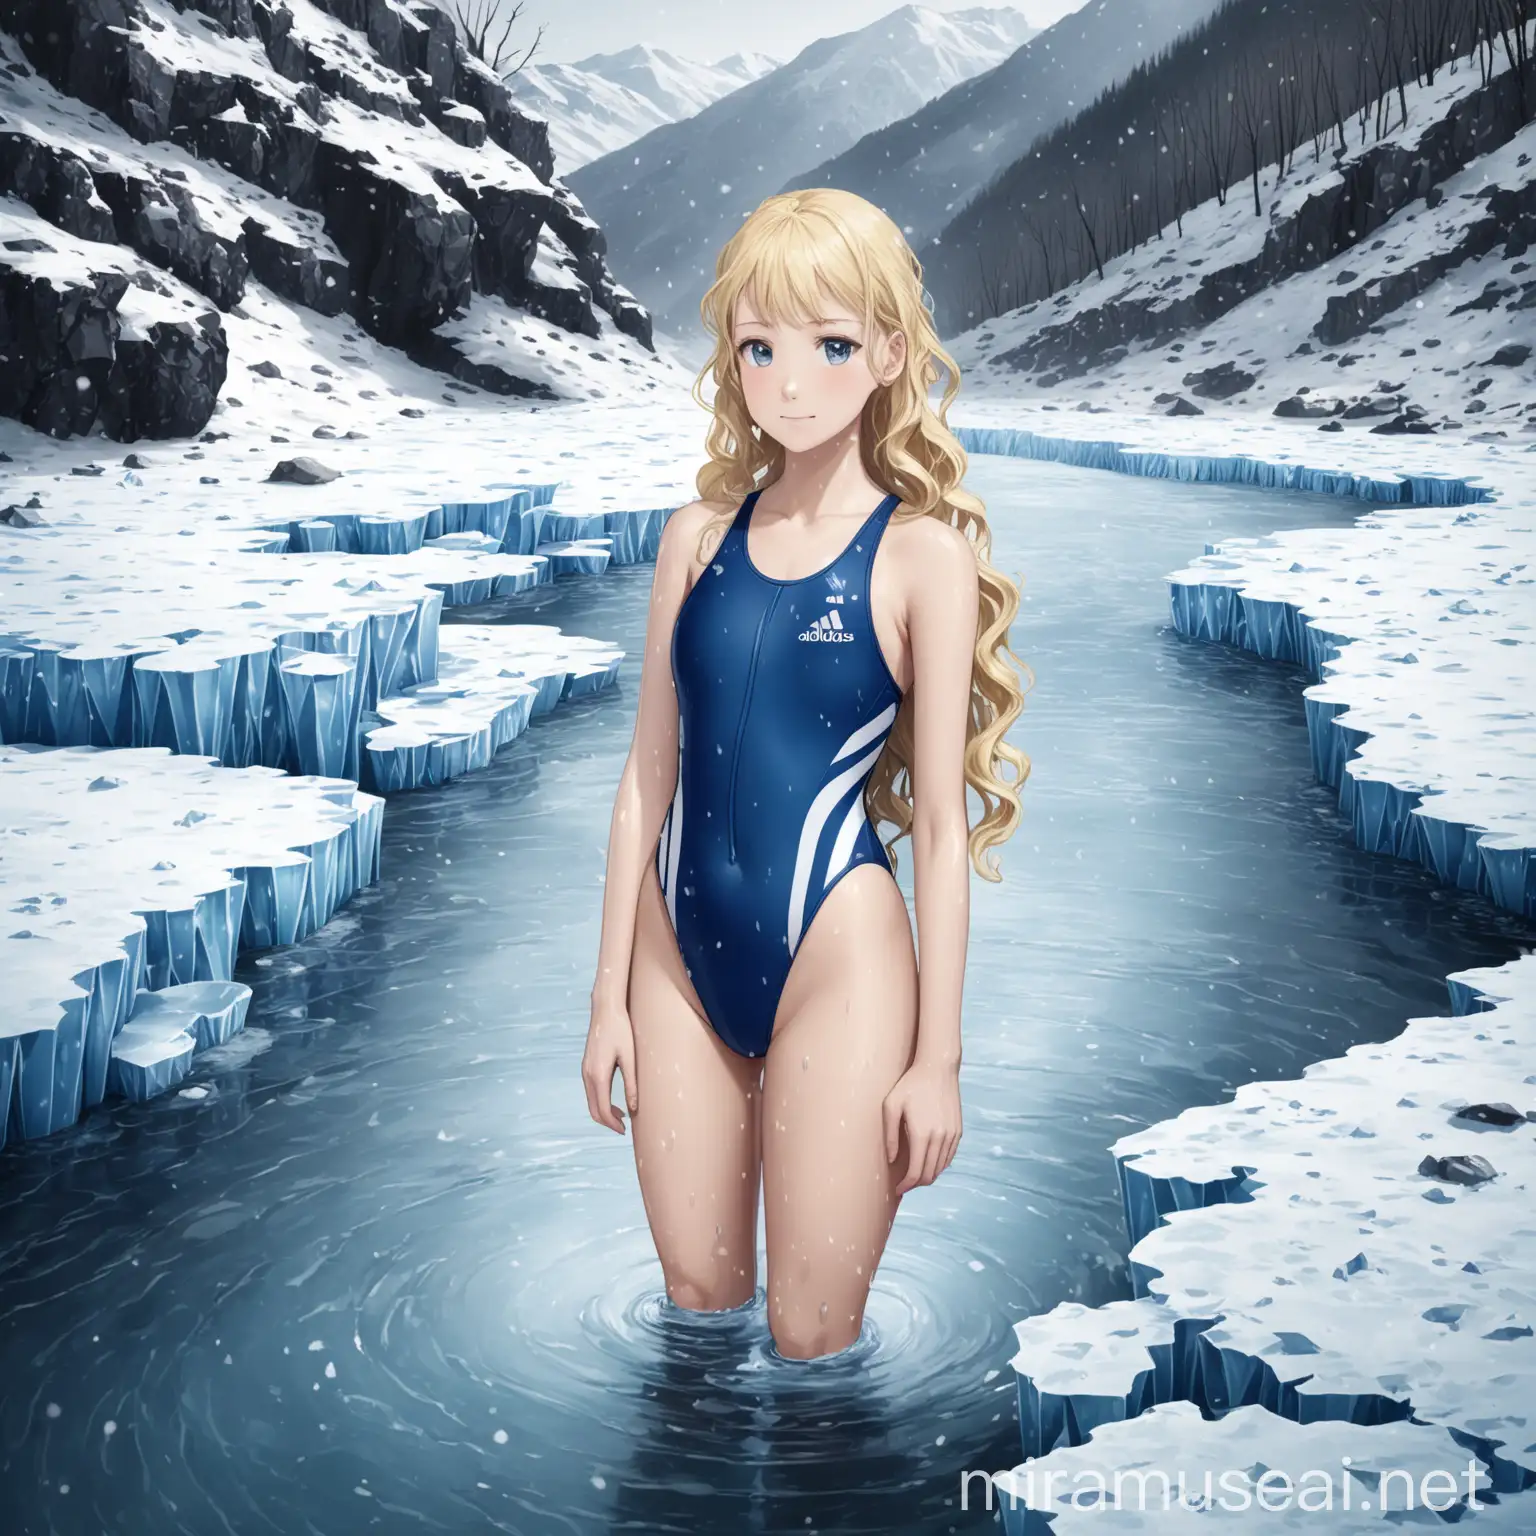 two 21 year old beautiful women swimmer, blond, high-leg-cut Adidas competition one-piece-swimsuits, standing in a mountain stream, long wavy hair, winter, ice, snow, frozen, freezing, shy smiles